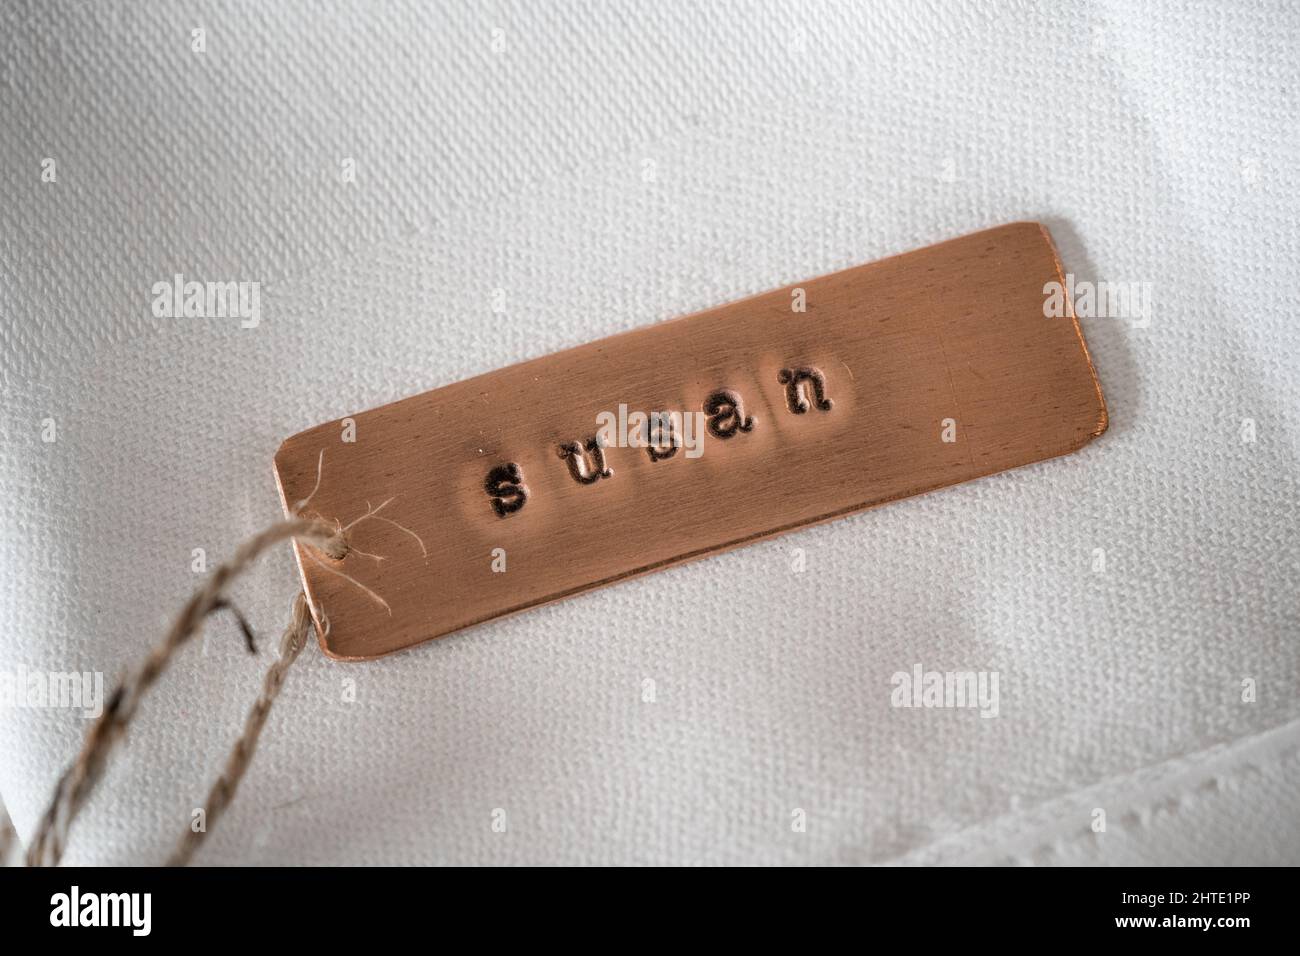 First name Susan identity engraved name dog tag copper metal name plate badge. Shiny and clean stamped letters on retro trinket pendent. Stock Photo